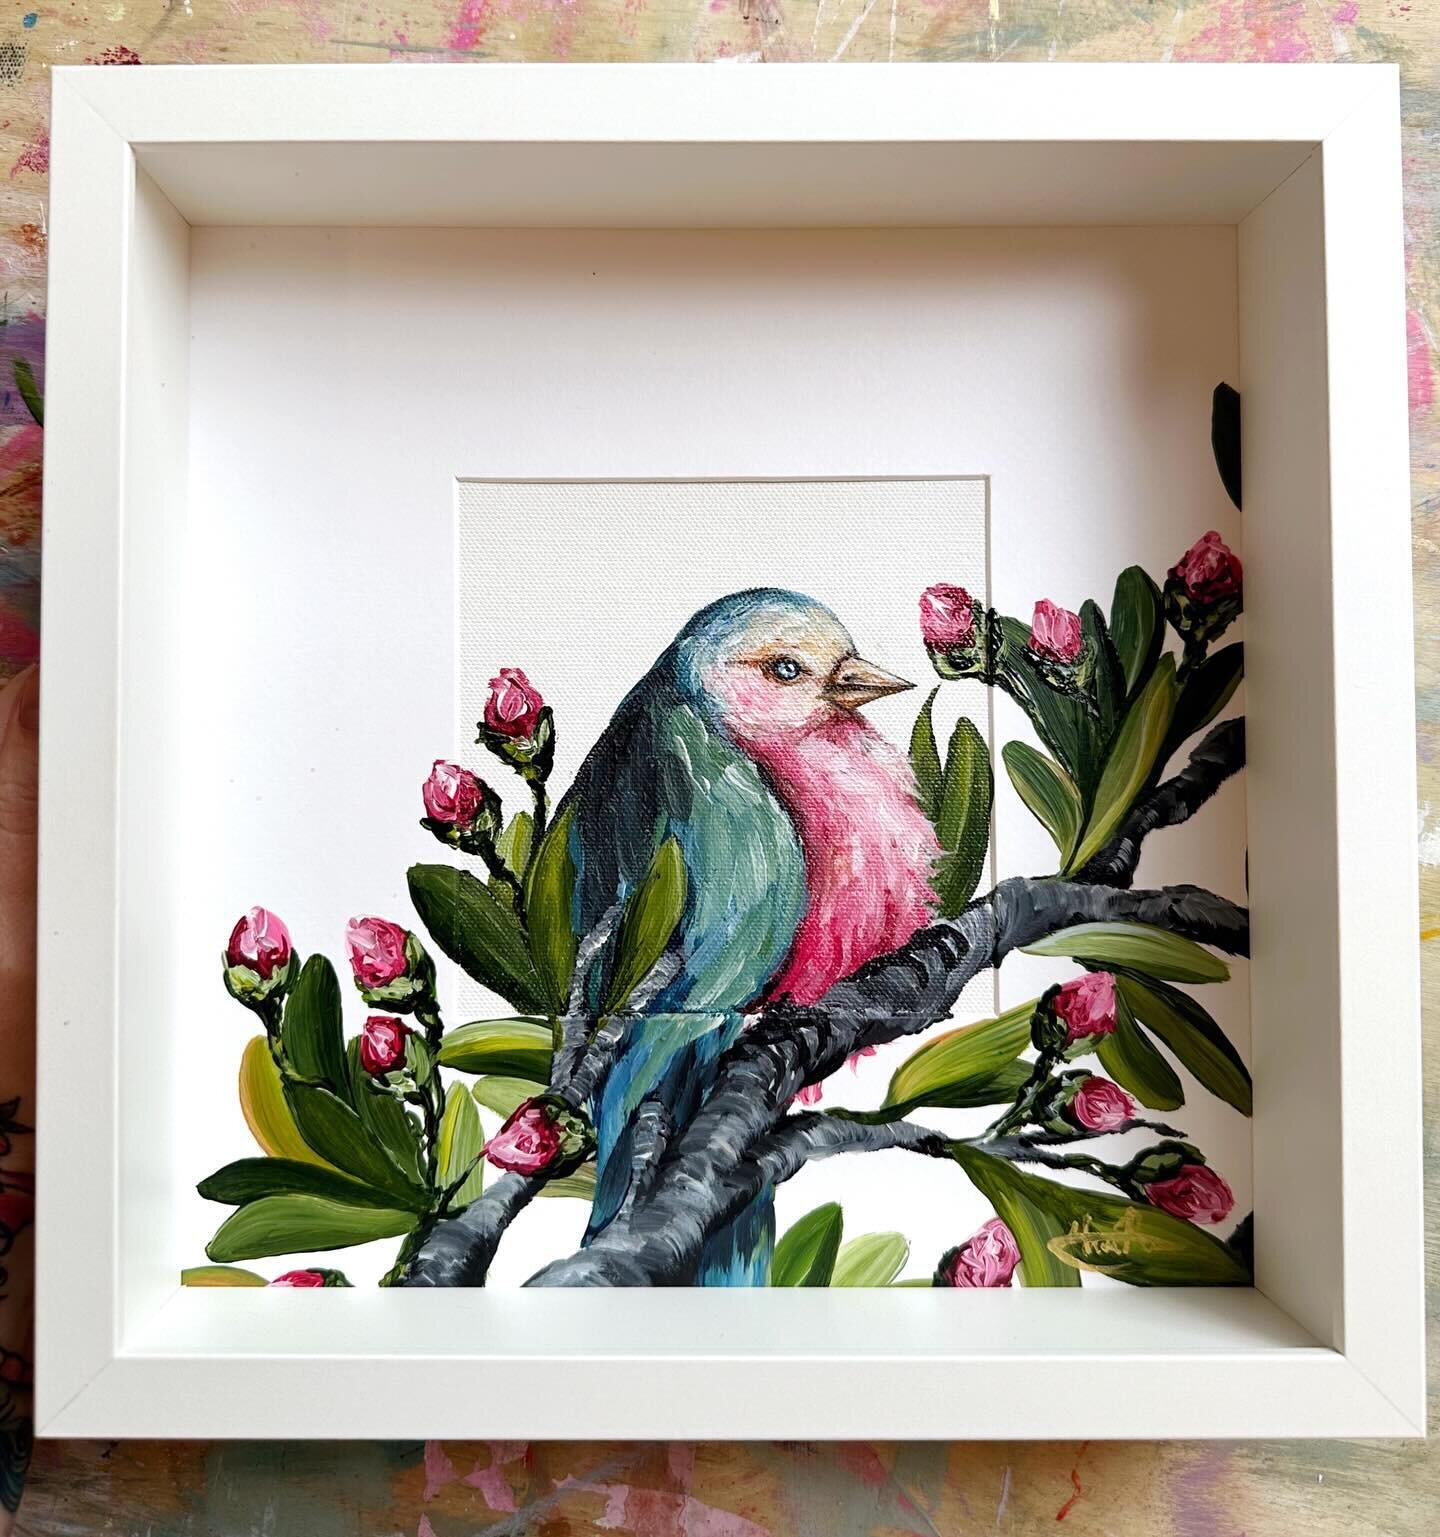 🌸🌿 The Plum Puff bird 🌸🌿
Available Framed Original art work
She is looking for her new home x
🌲Size 27x 27cm square with Painted frame ✨
🫐Price &pound;250
Plus p&amp;p 
🌸The puffy spring bird who turns blossoms to fruit! (And eats as much of t